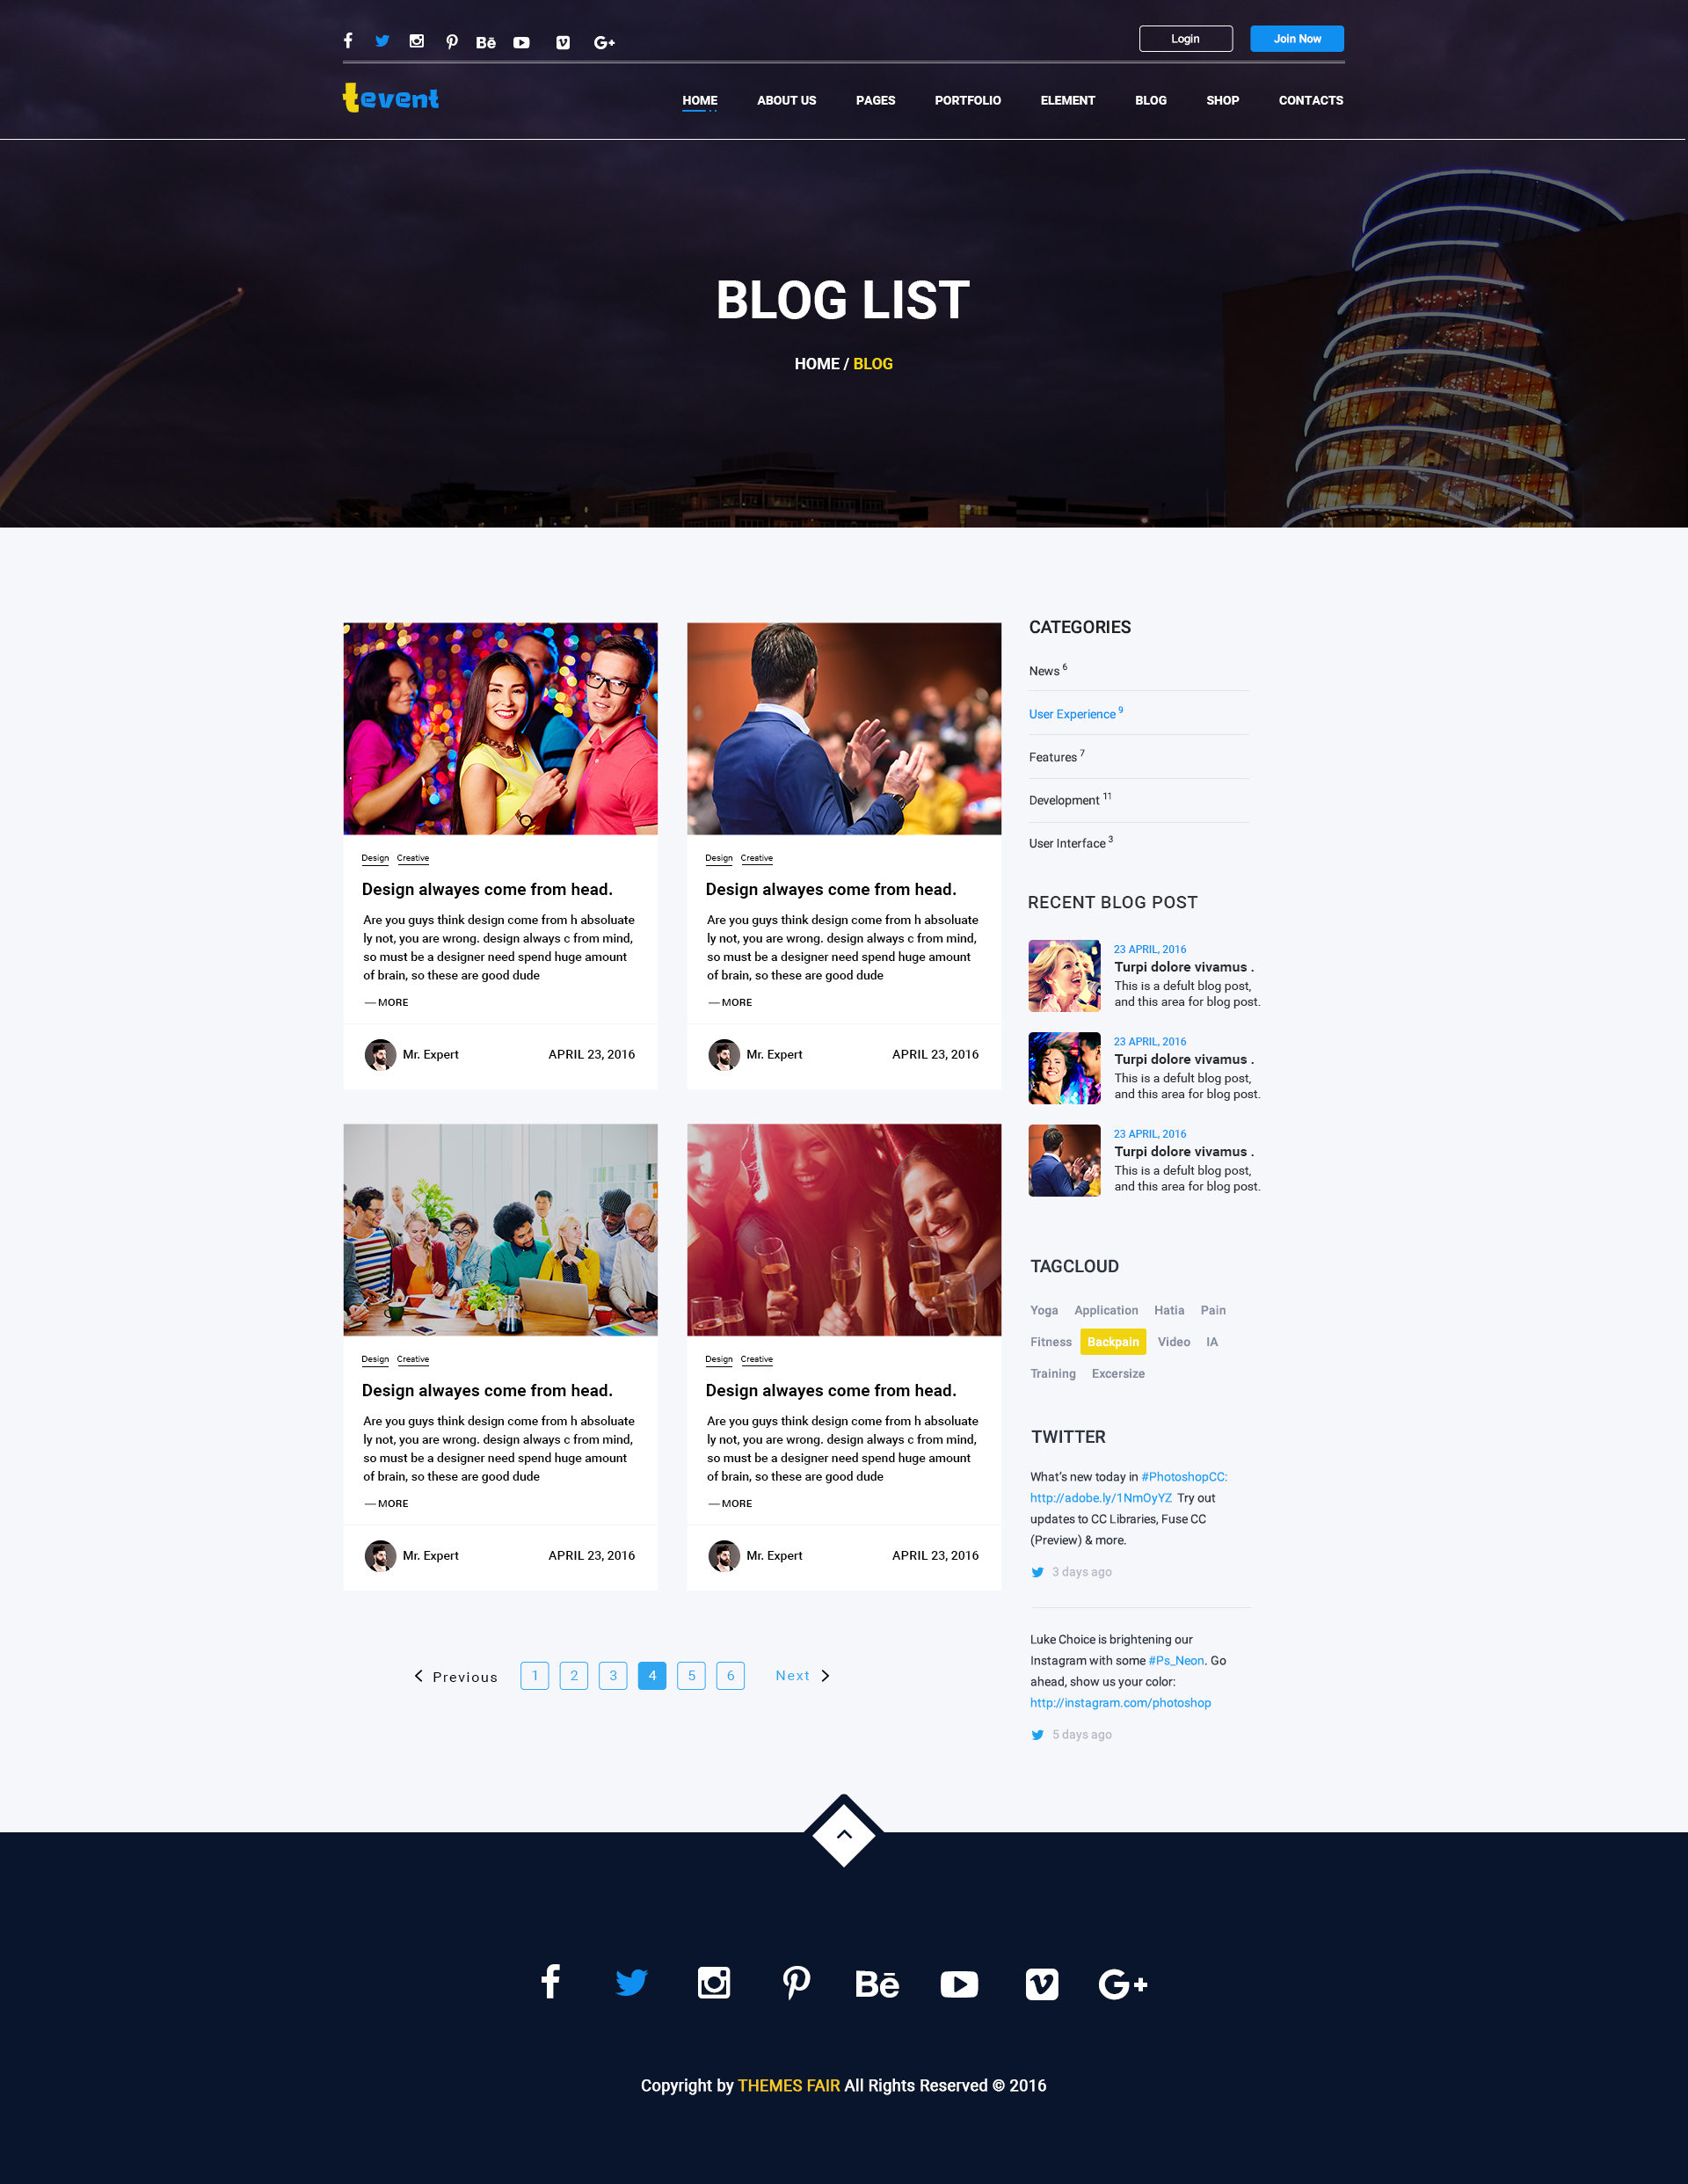 T Event - Event Conference & Meetup PSD Template